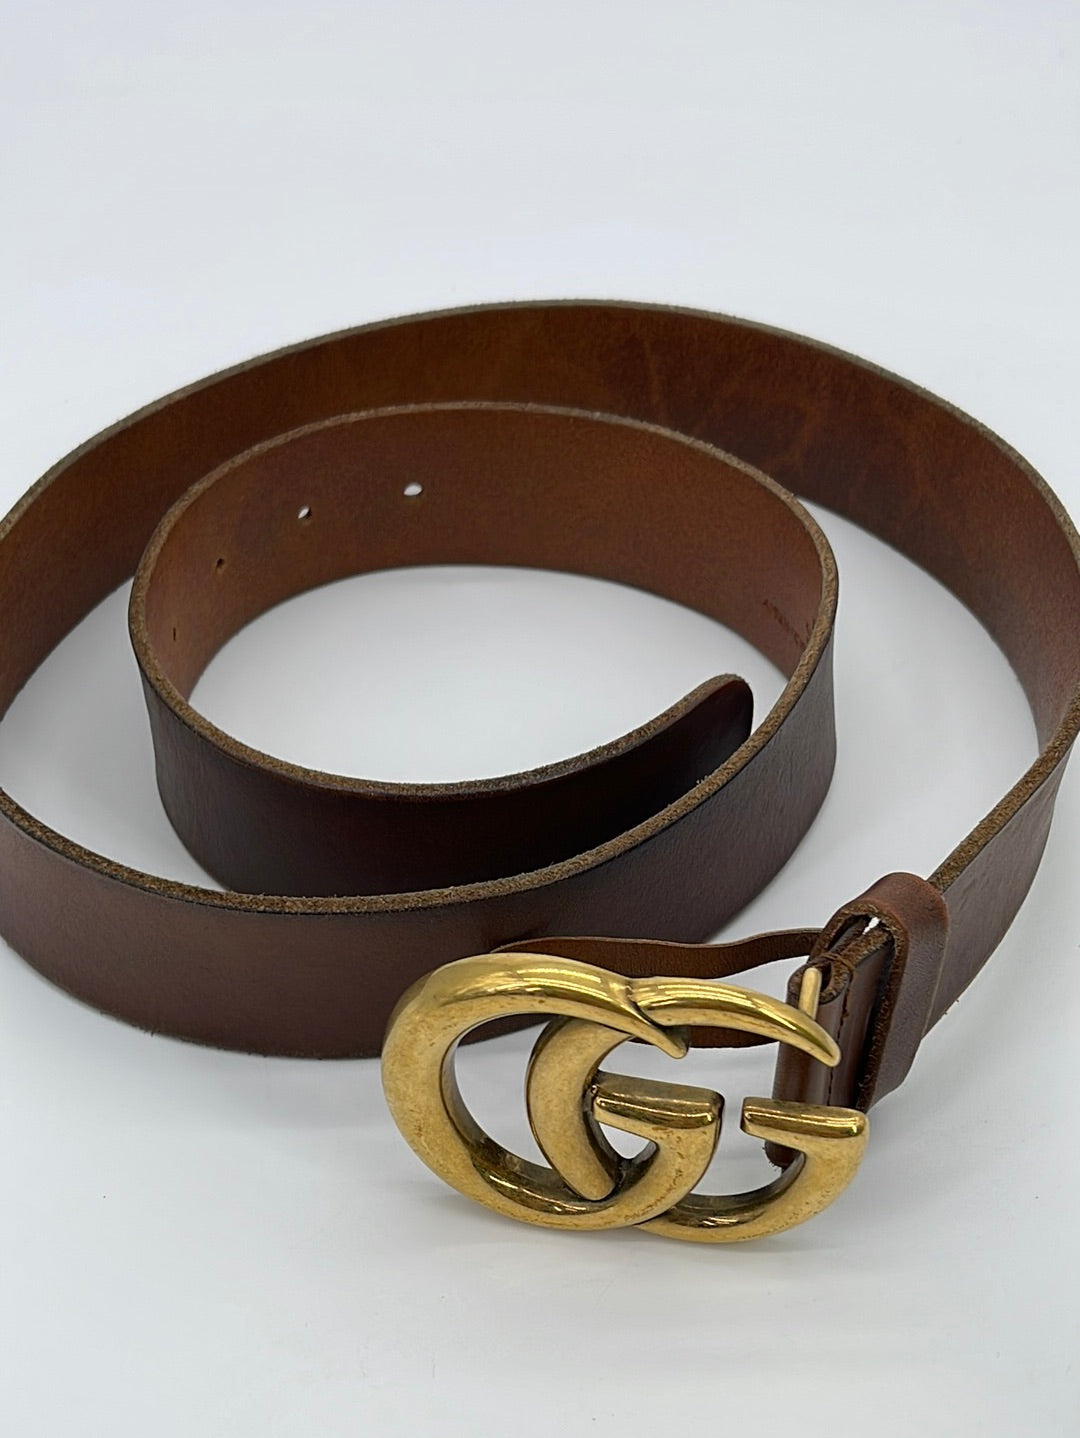 GUCCI Brown Leather Belt Size 110/44 525040 Made In Italy